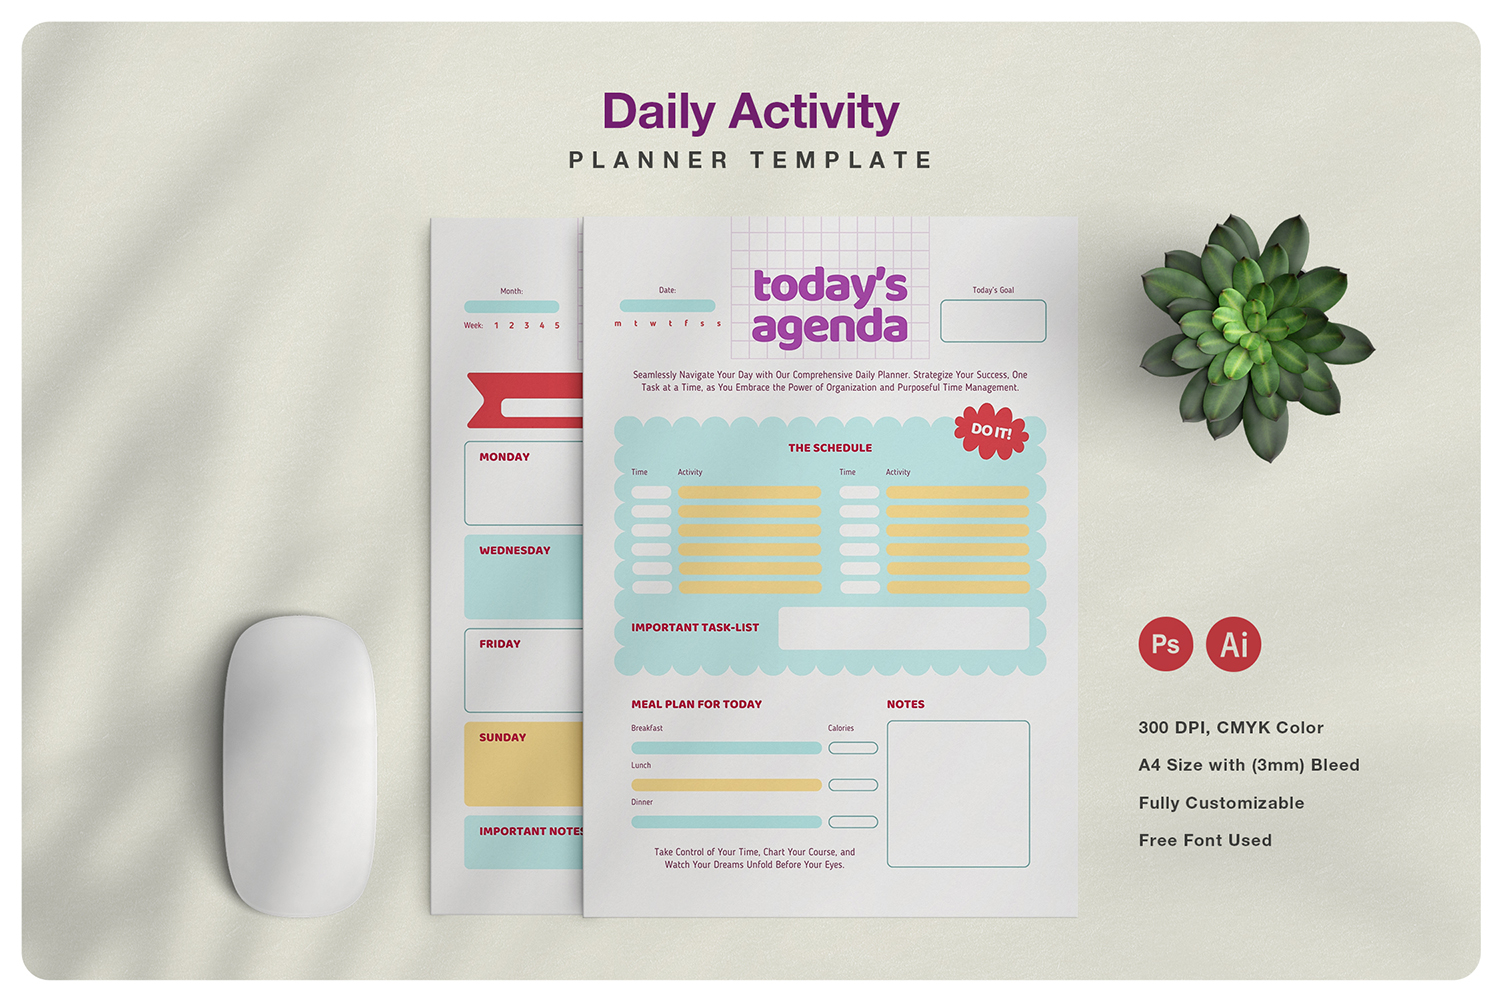 Playful Daily Activity Planner